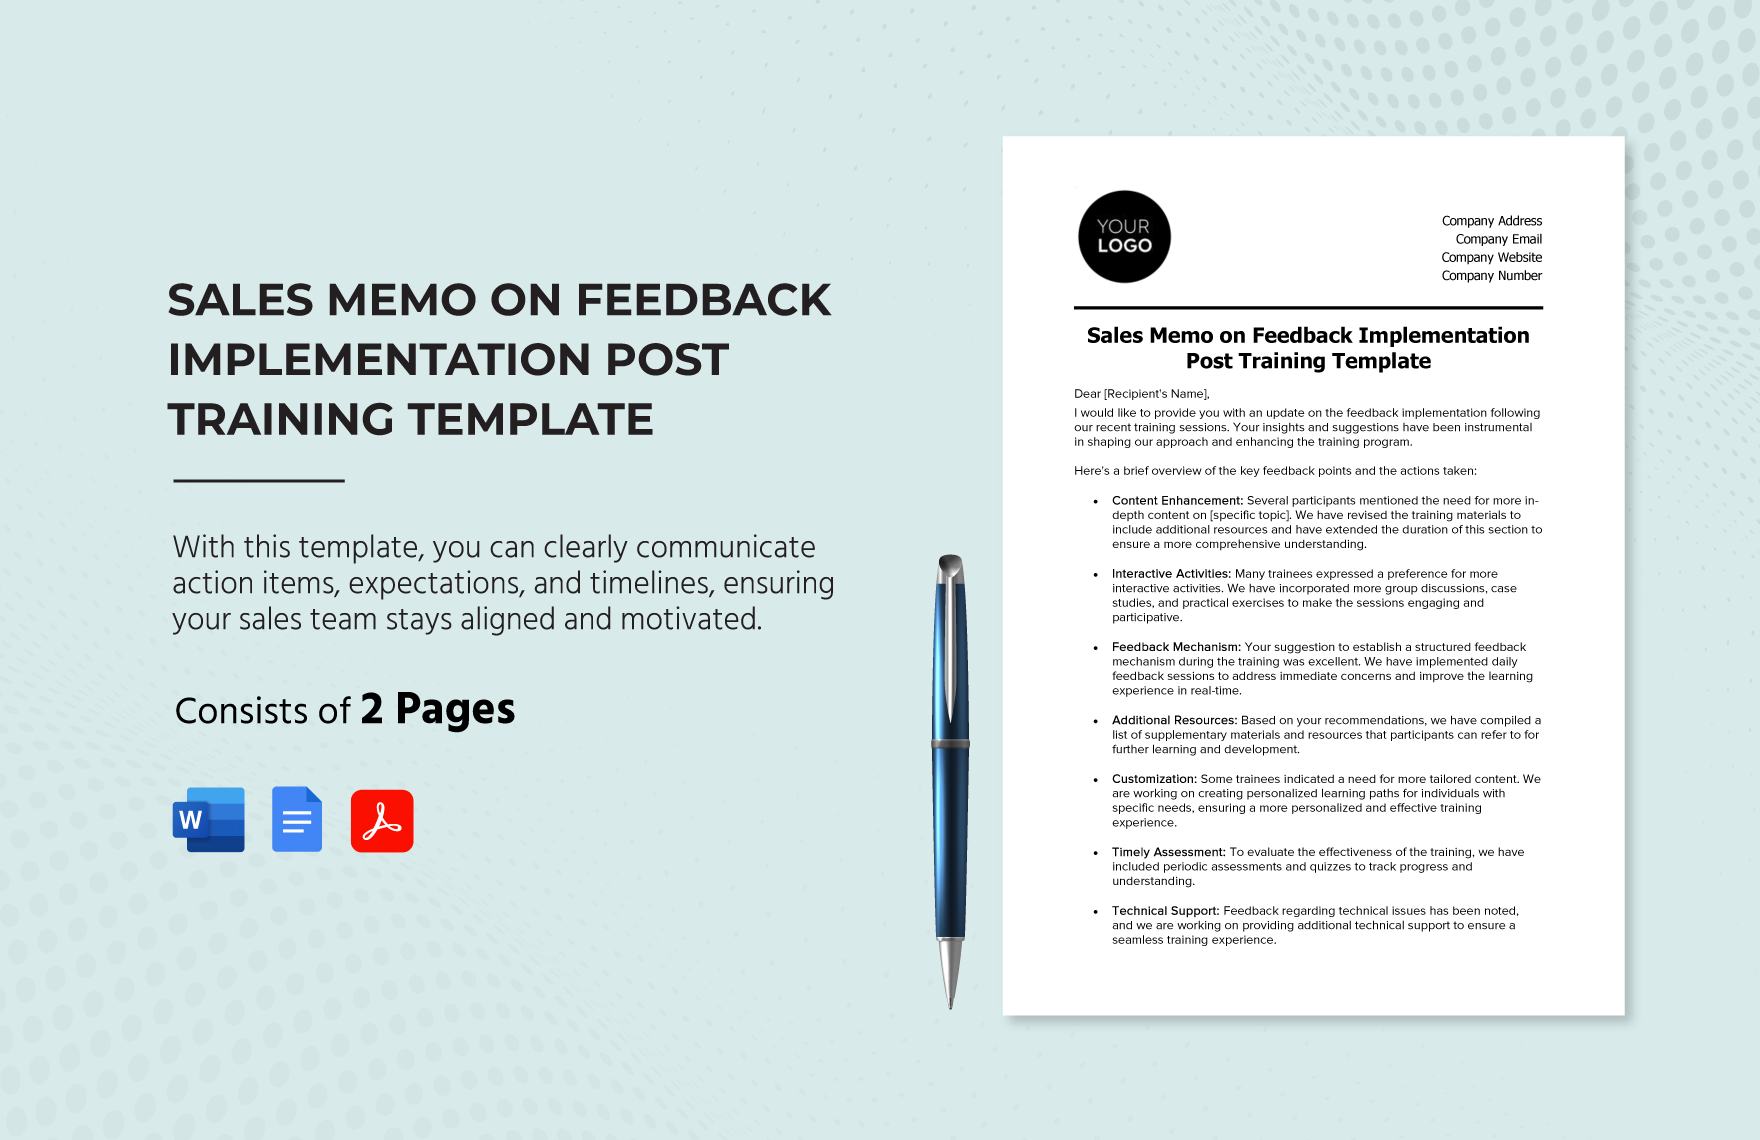 Sales Memo on Feedback Implementation Post Training Template